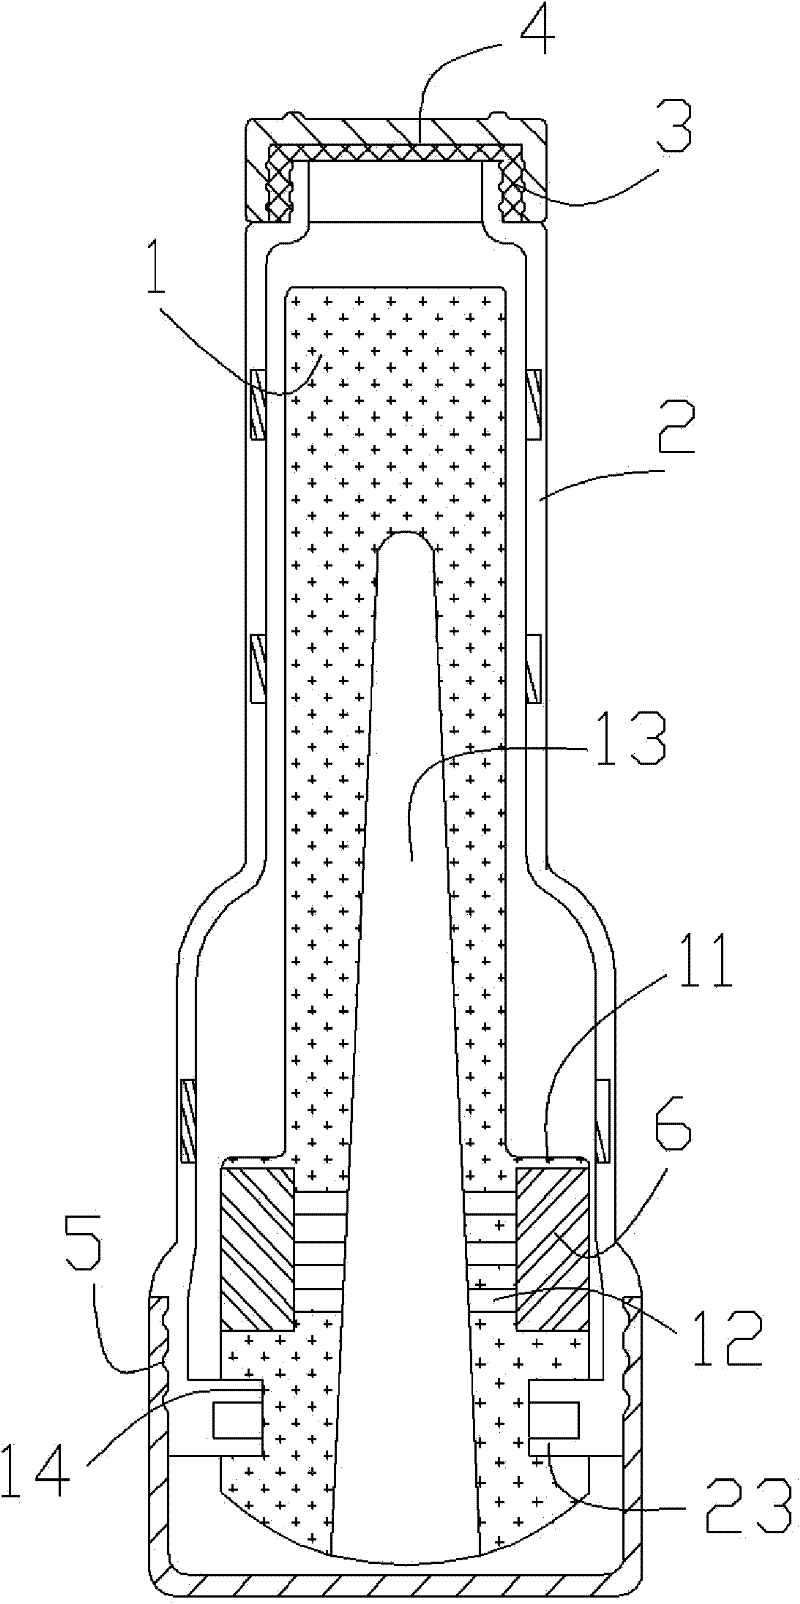 Device for treating premature ejaculation or stimulating male congestive cavernous body